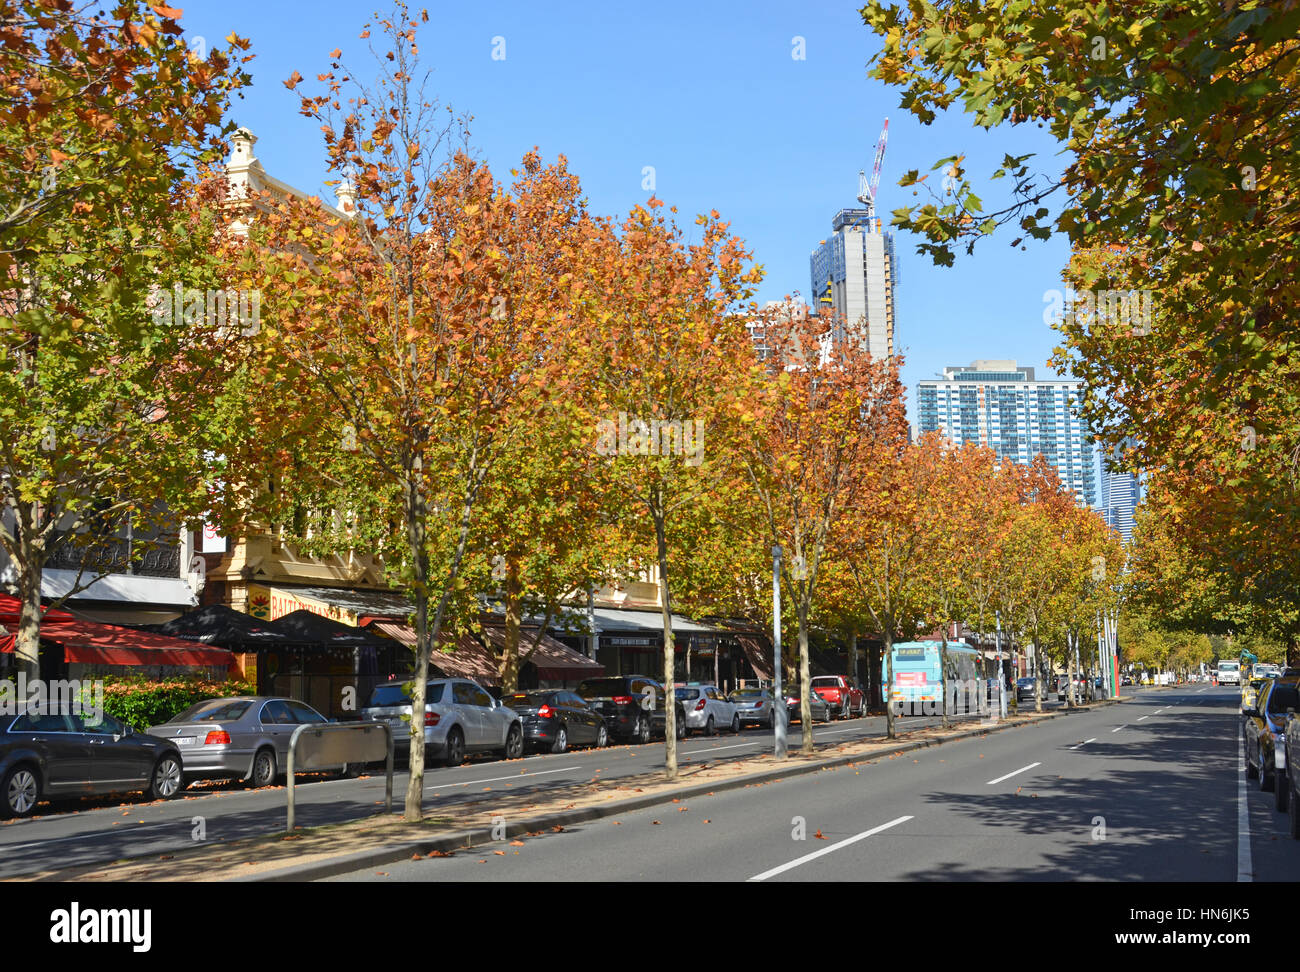 Melbourne, Australia - May 14, 2014: Lygon Street in Autumn - home to many of Melbourne's famous restaurants, cafes and bars. Stock Photo